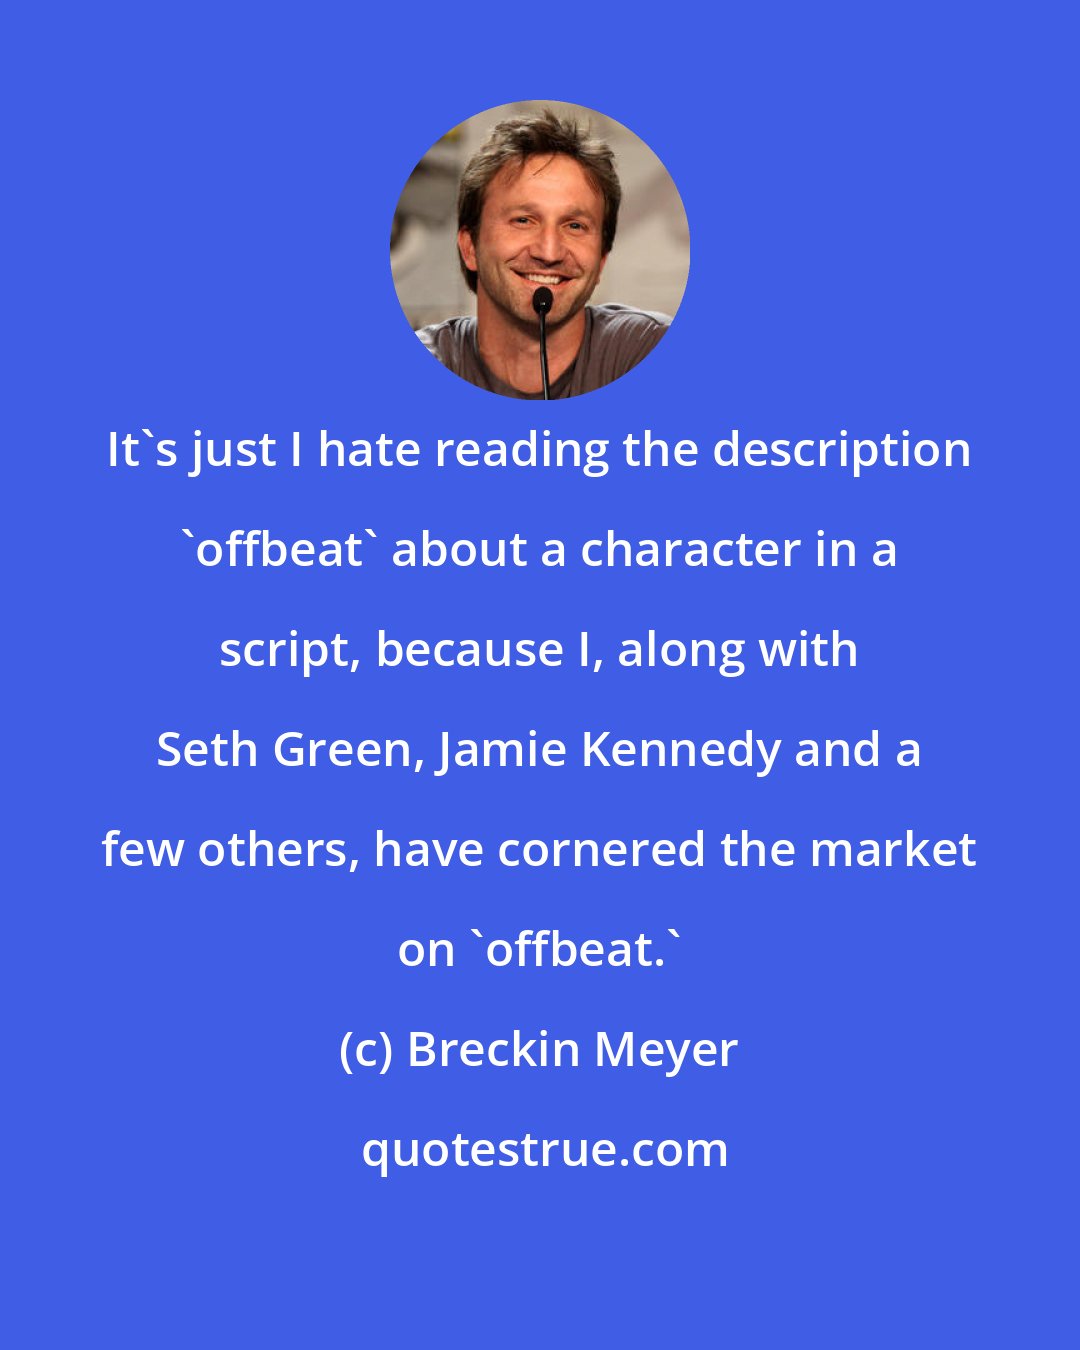 Breckin Meyer: It's just I hate reading the description 'offbeat' about a character in a script, because I, along with Seth Green, Jamie Kennedy and a few others, have cornered the market on 'offbeat.'